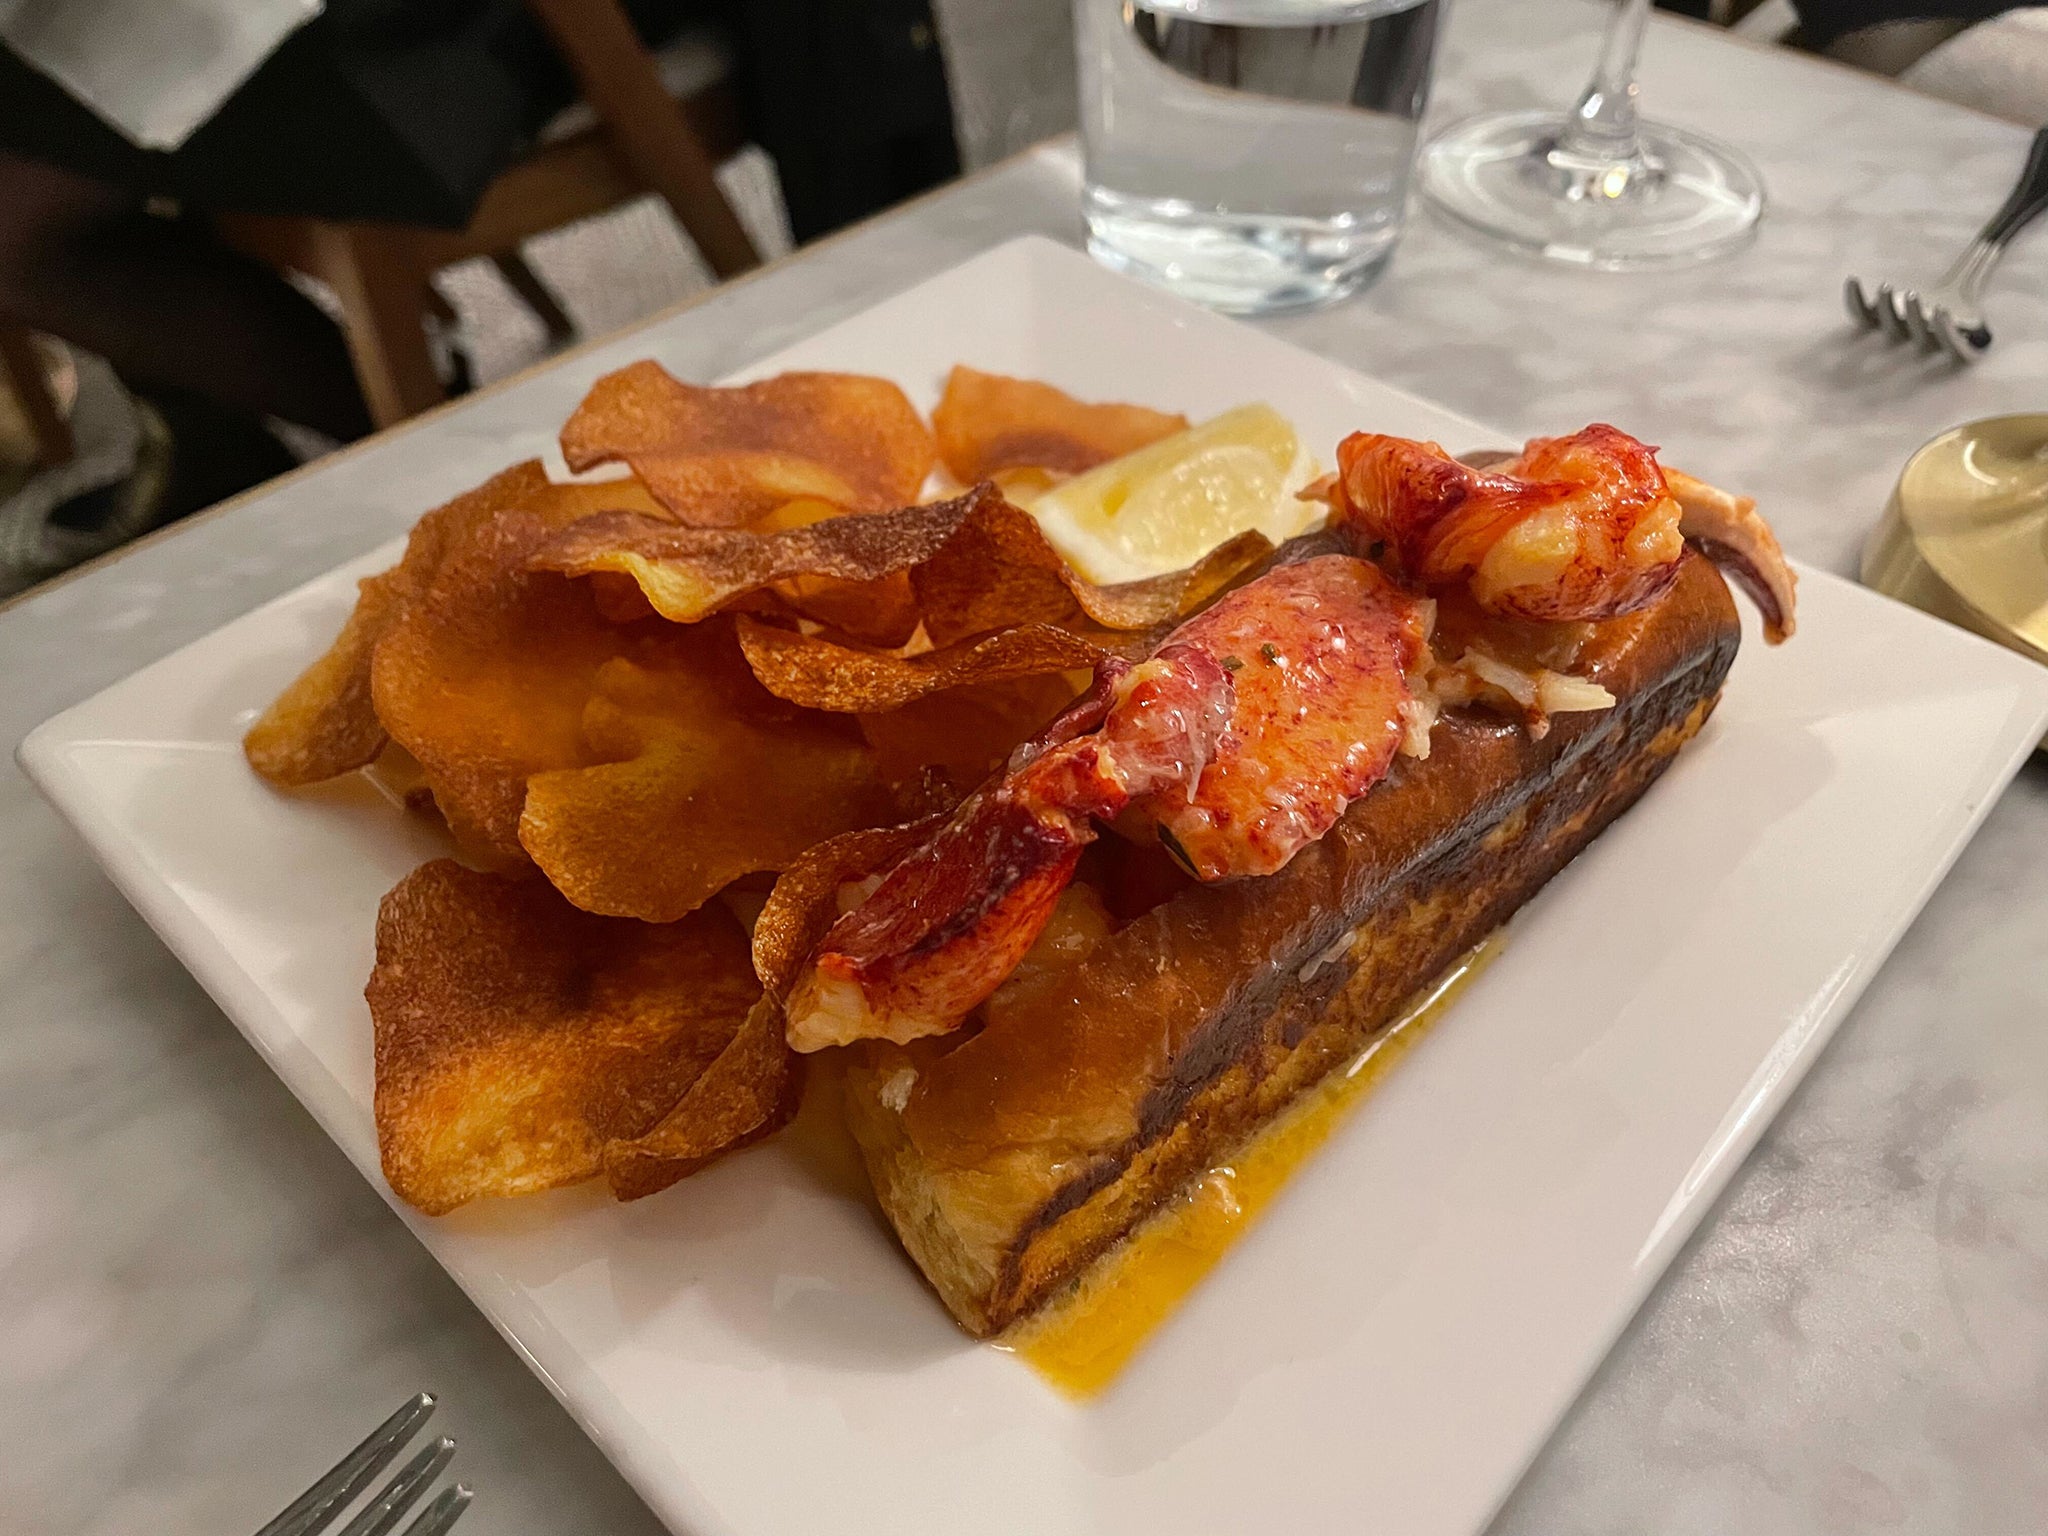 New England lobster roll with house-made crisps are a must-have